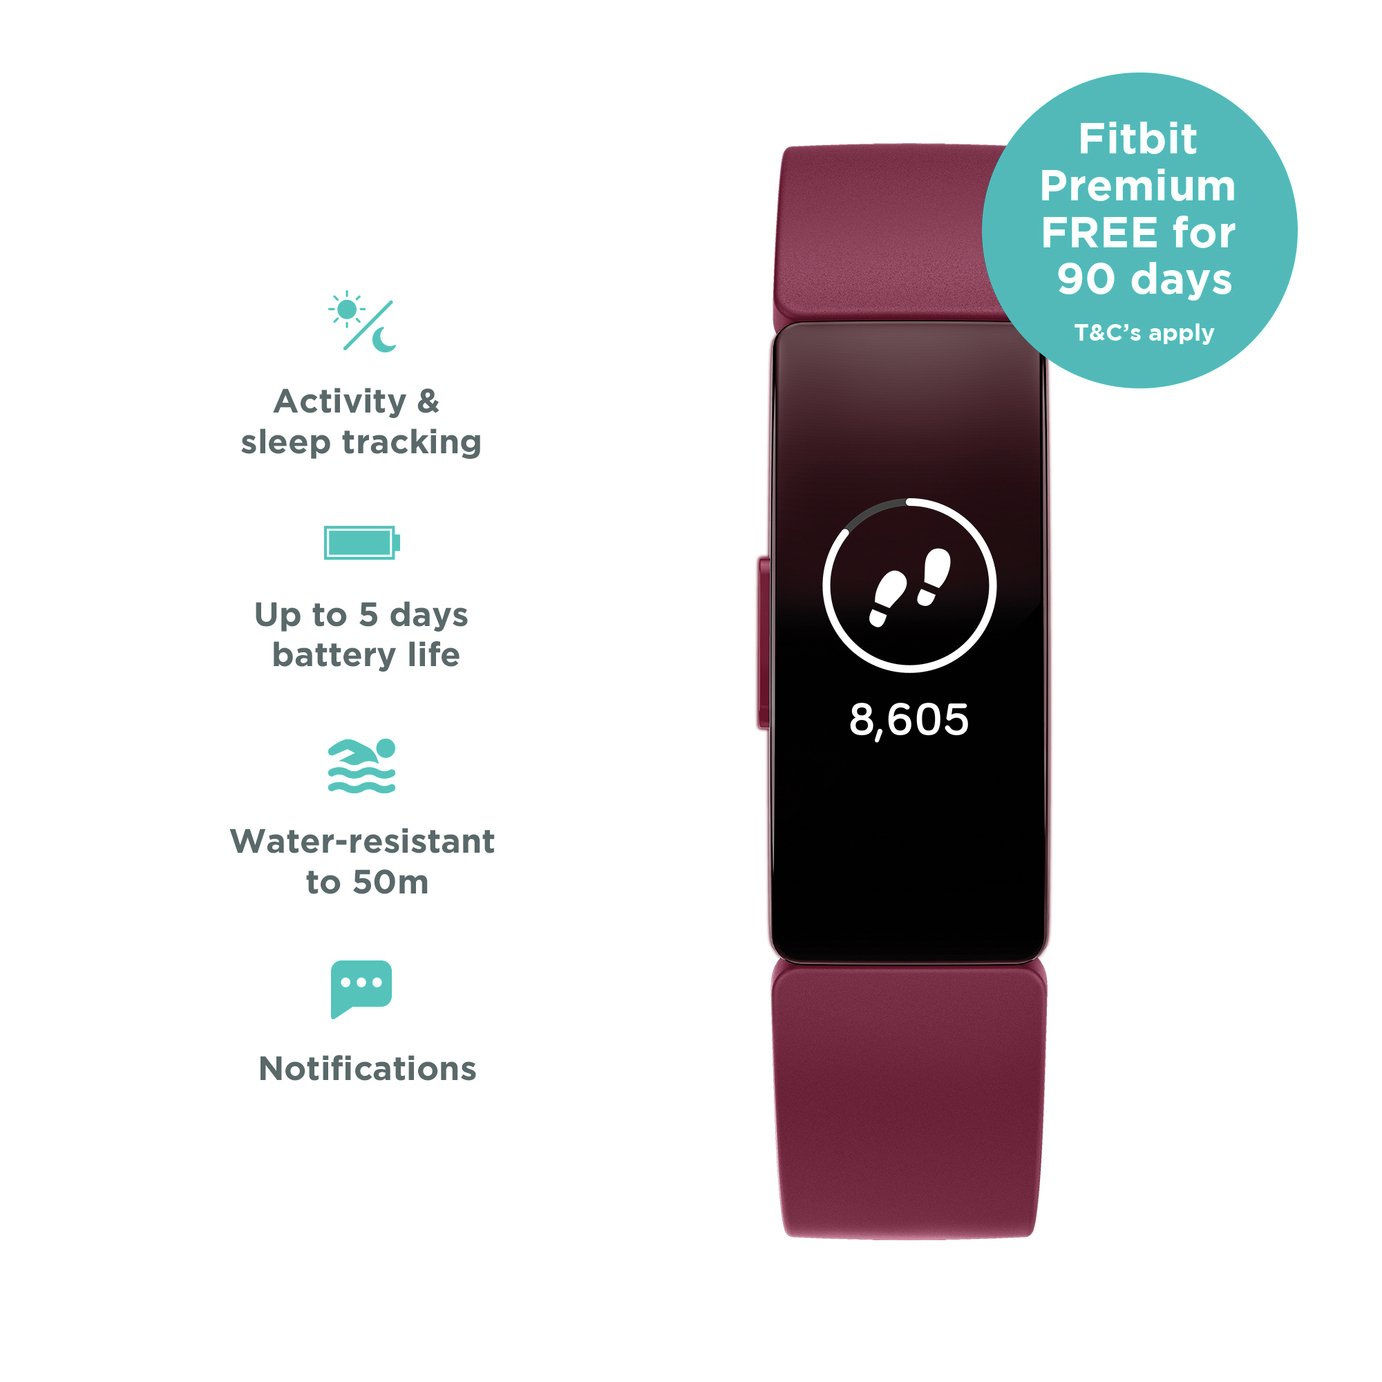 Fitbit Inspire Smart Watch Review